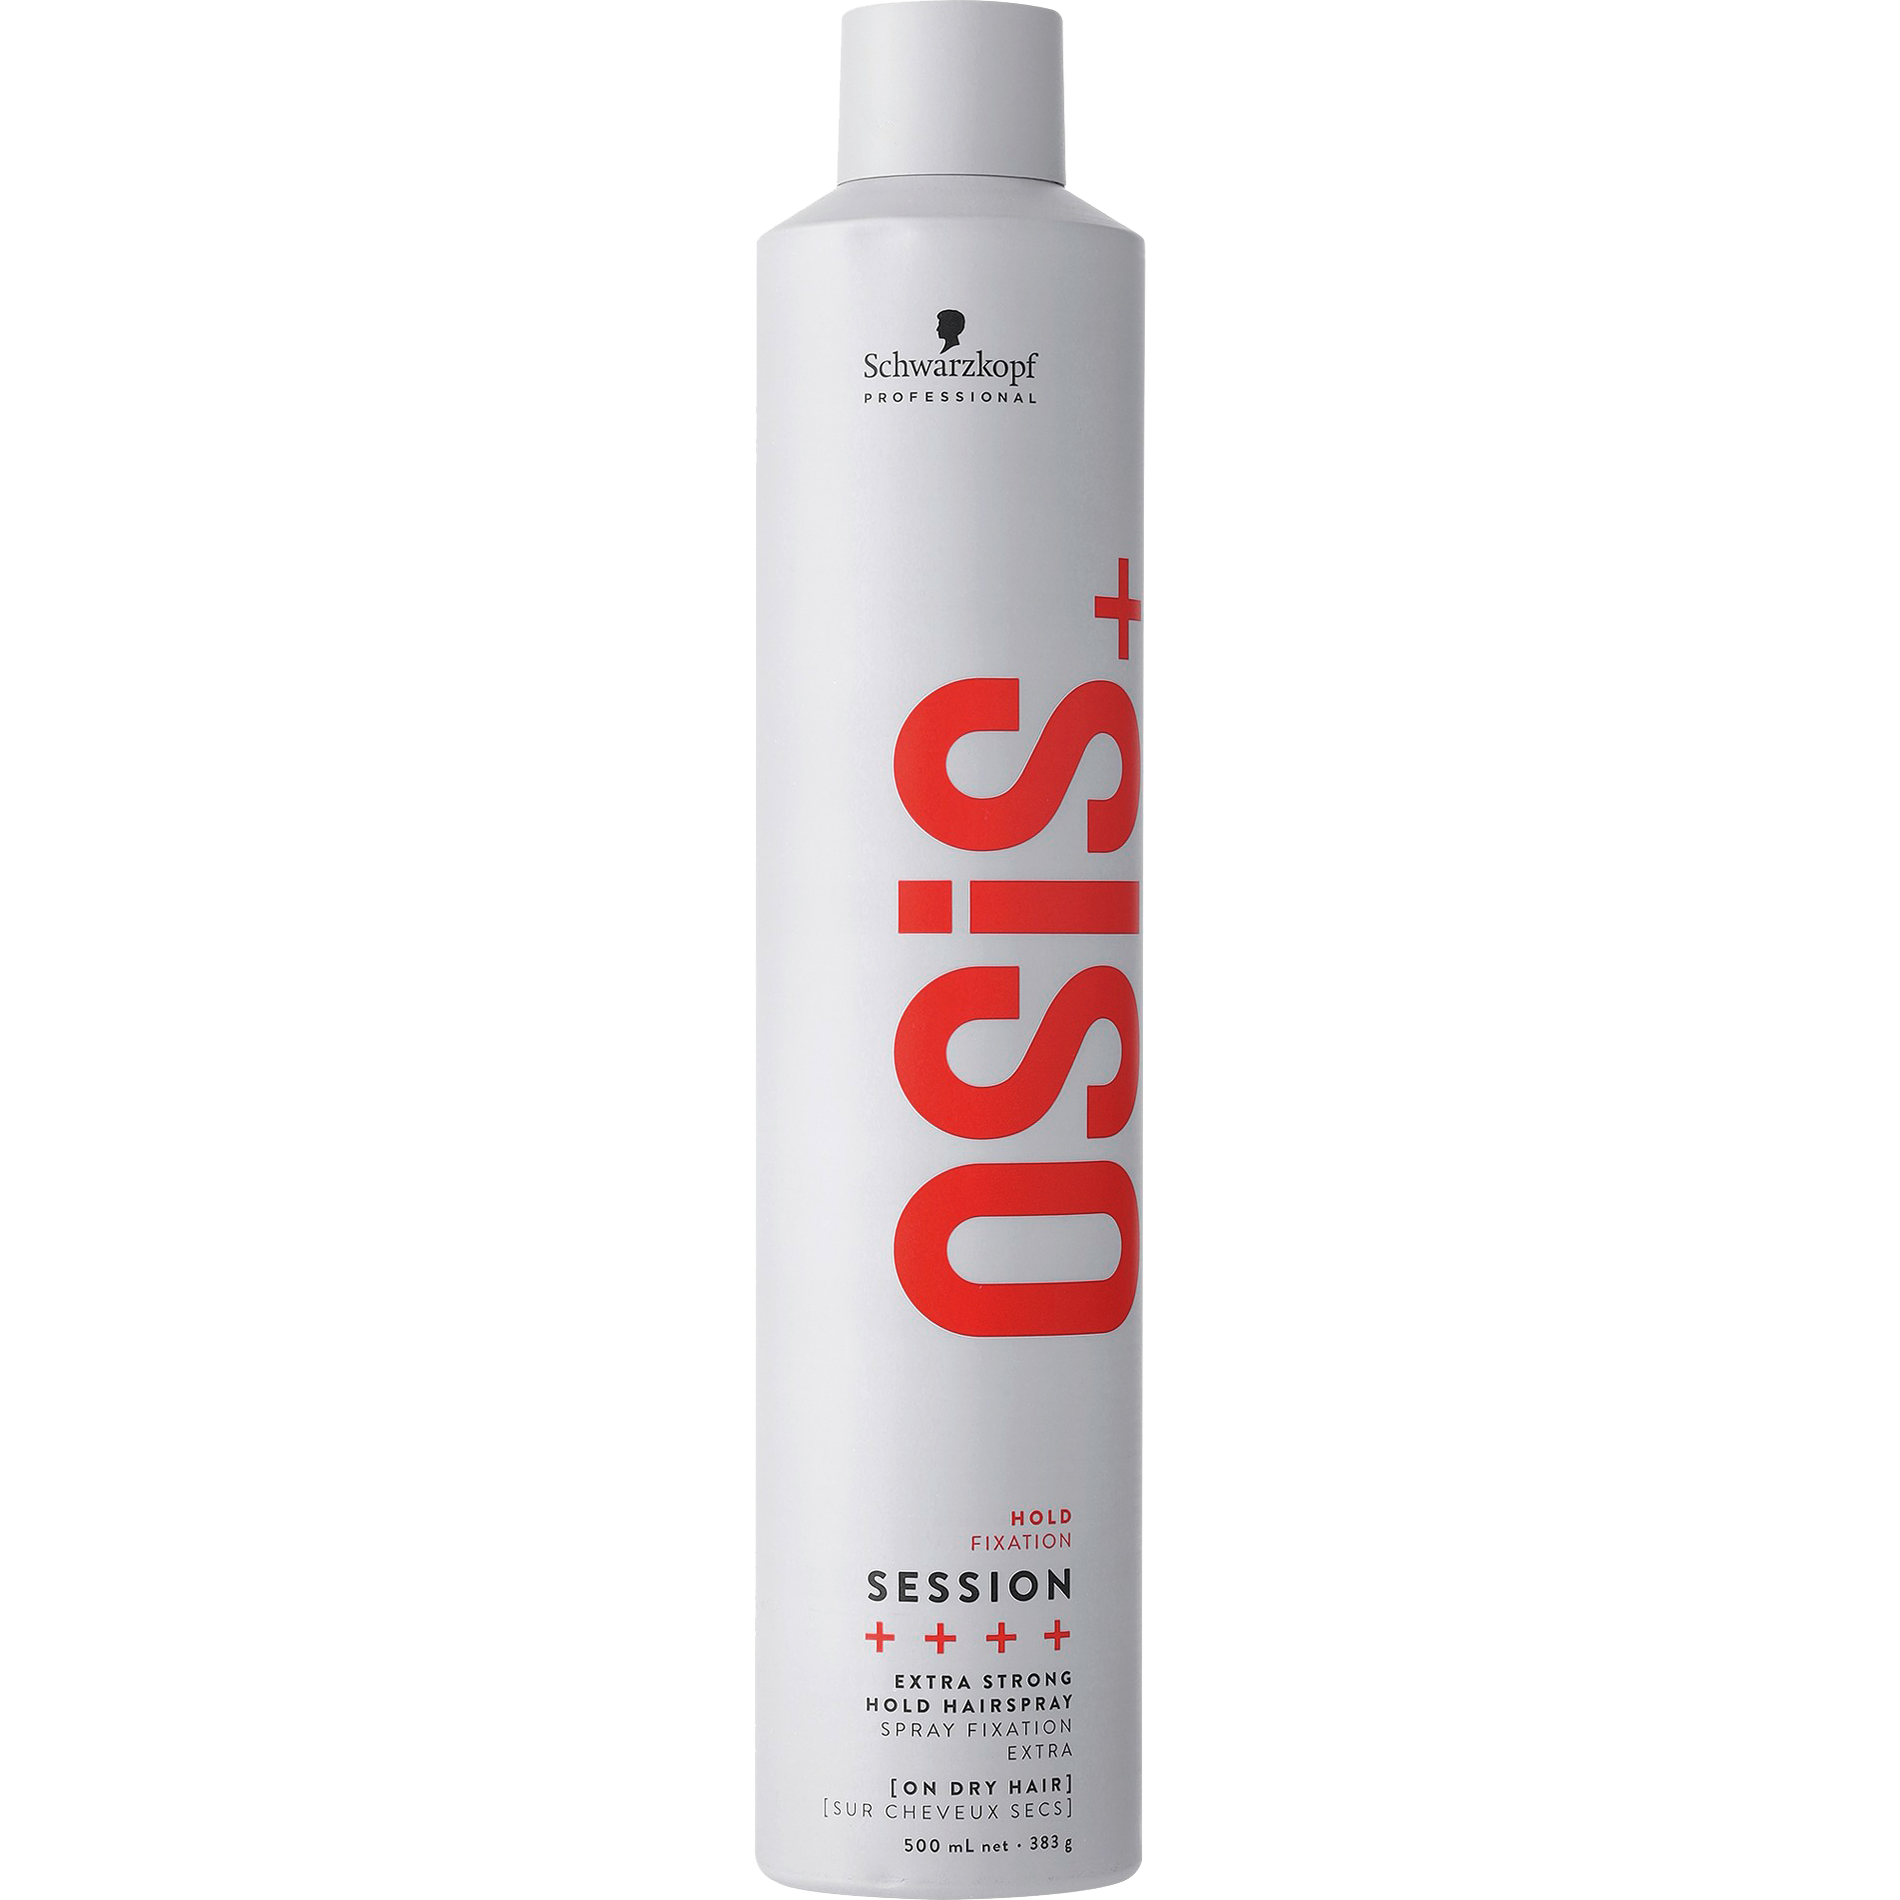 Schwarzkopf Professional Osis+ Hold Session 500 ml